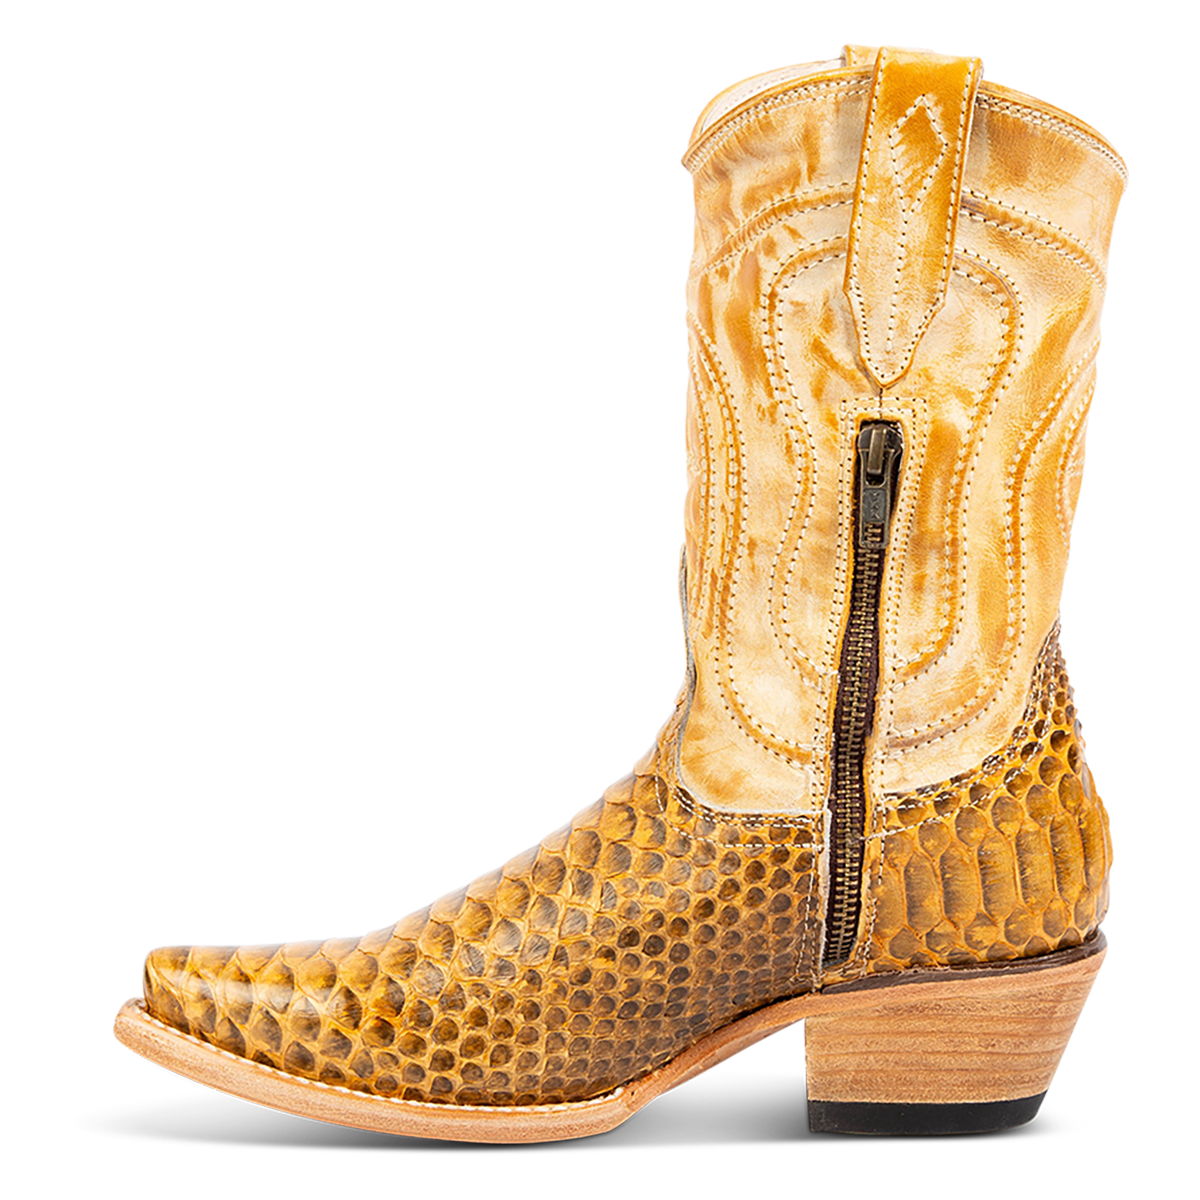 Inside view showing working brass zipper on FREEBIRD women's Warrick yellow python multi exotic leather western cowgirl mid calf boot